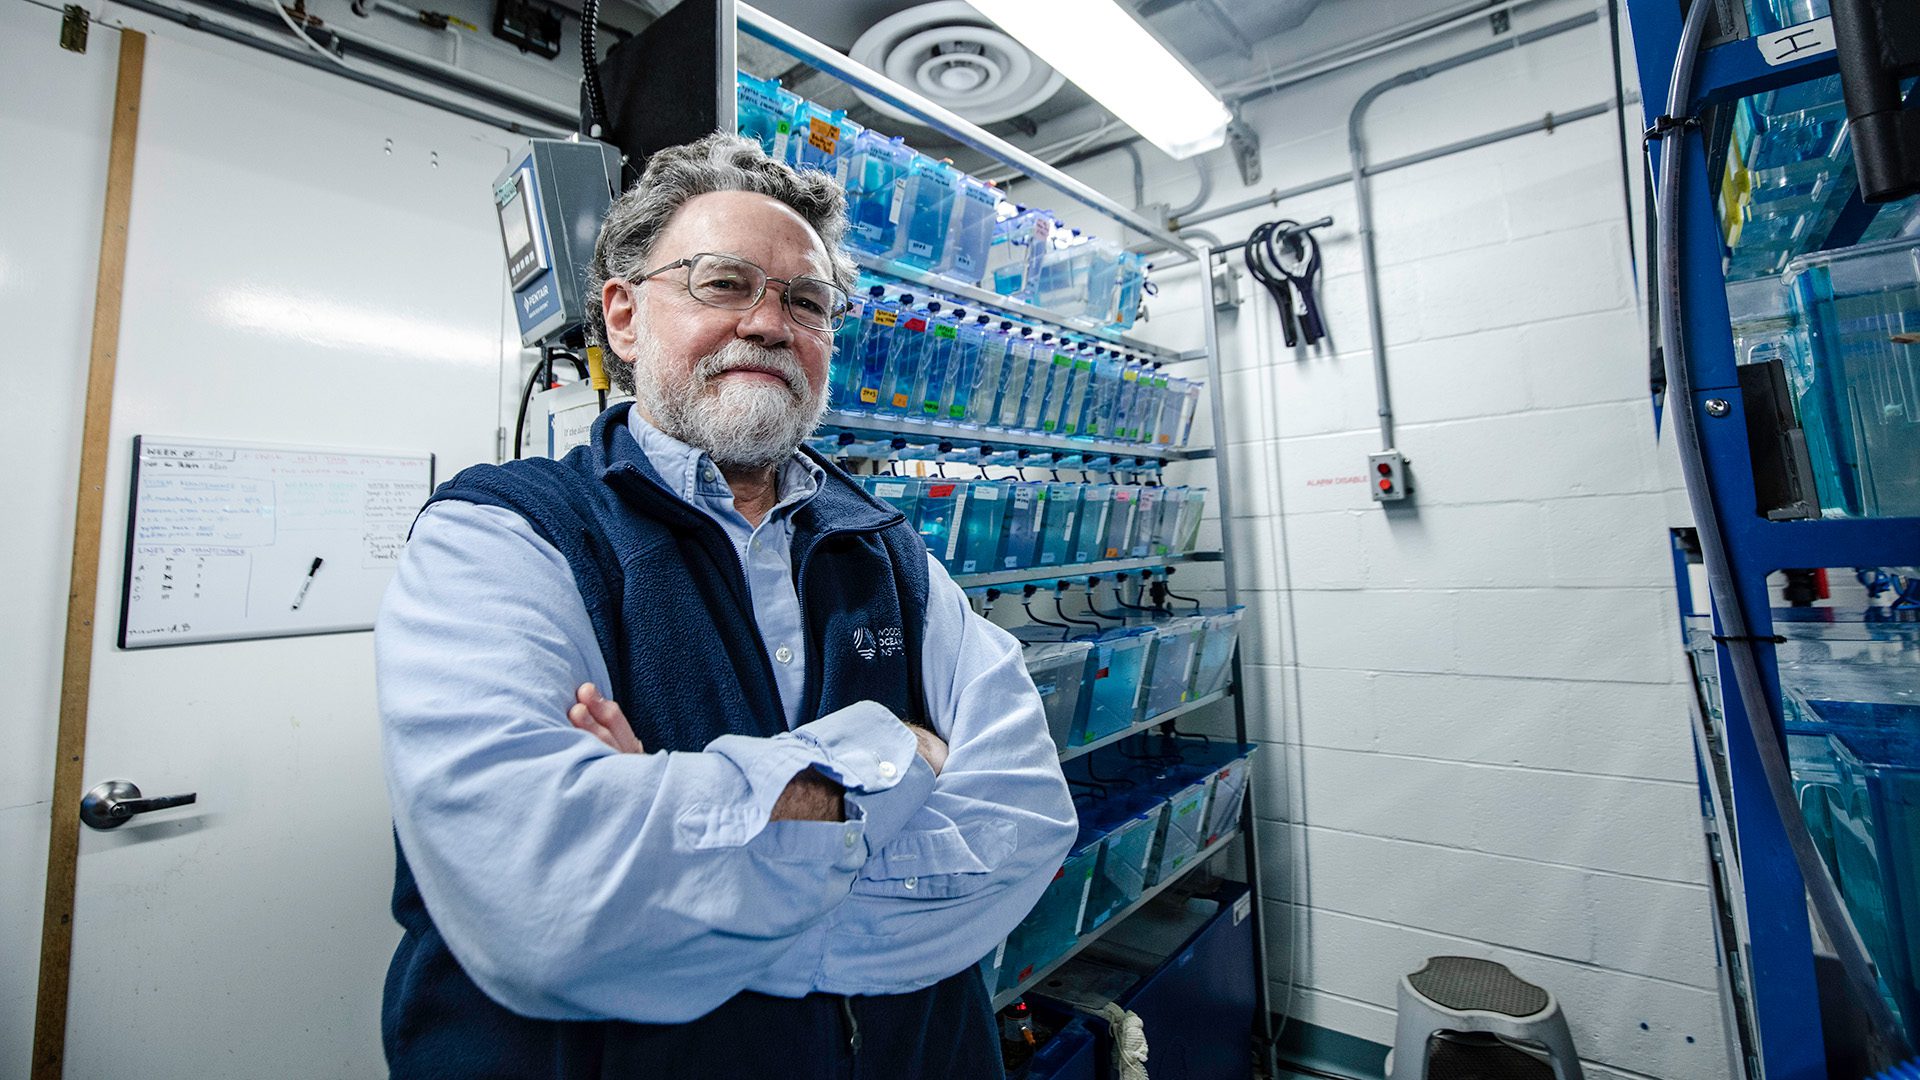 This spring, senior scientist Dr. Mark Hahn joined fellow WHOI researchers and international collaborators to develop a report on ocean plastics aimed for the health and medical community. (Photo by Daniel Hentz, © Woods Hole Oceanographic Institution)